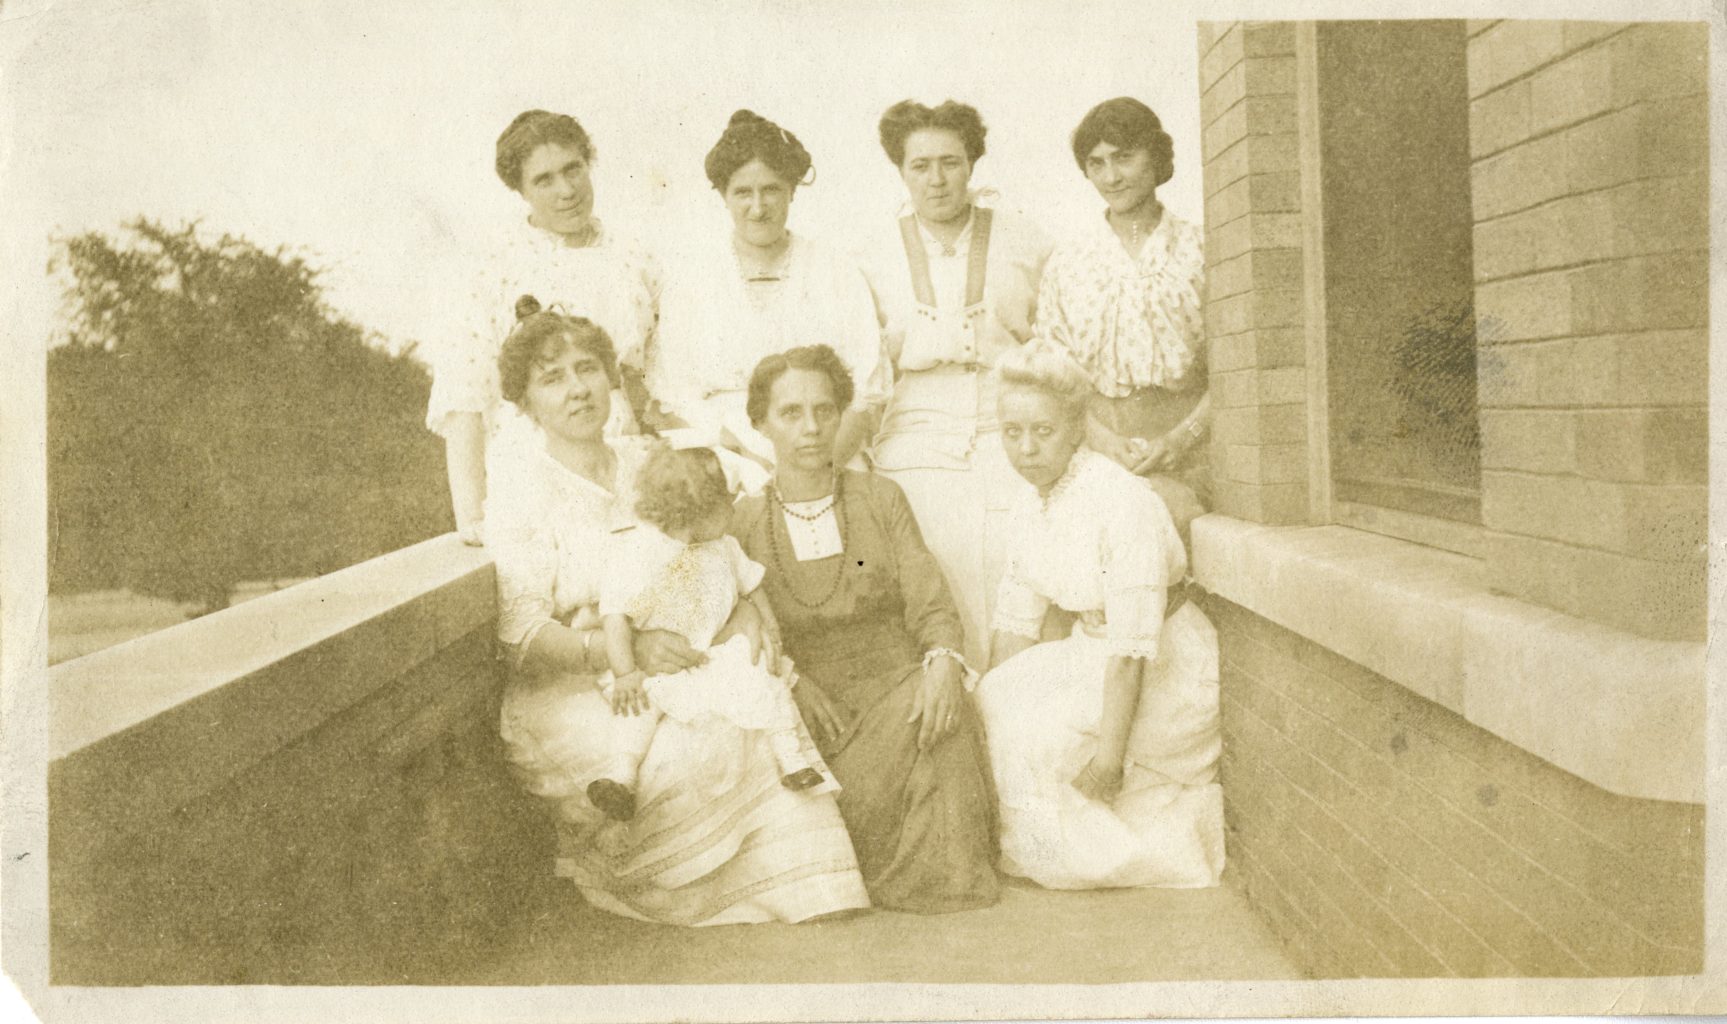 Seven women and young girl pose for photograph outside of building.